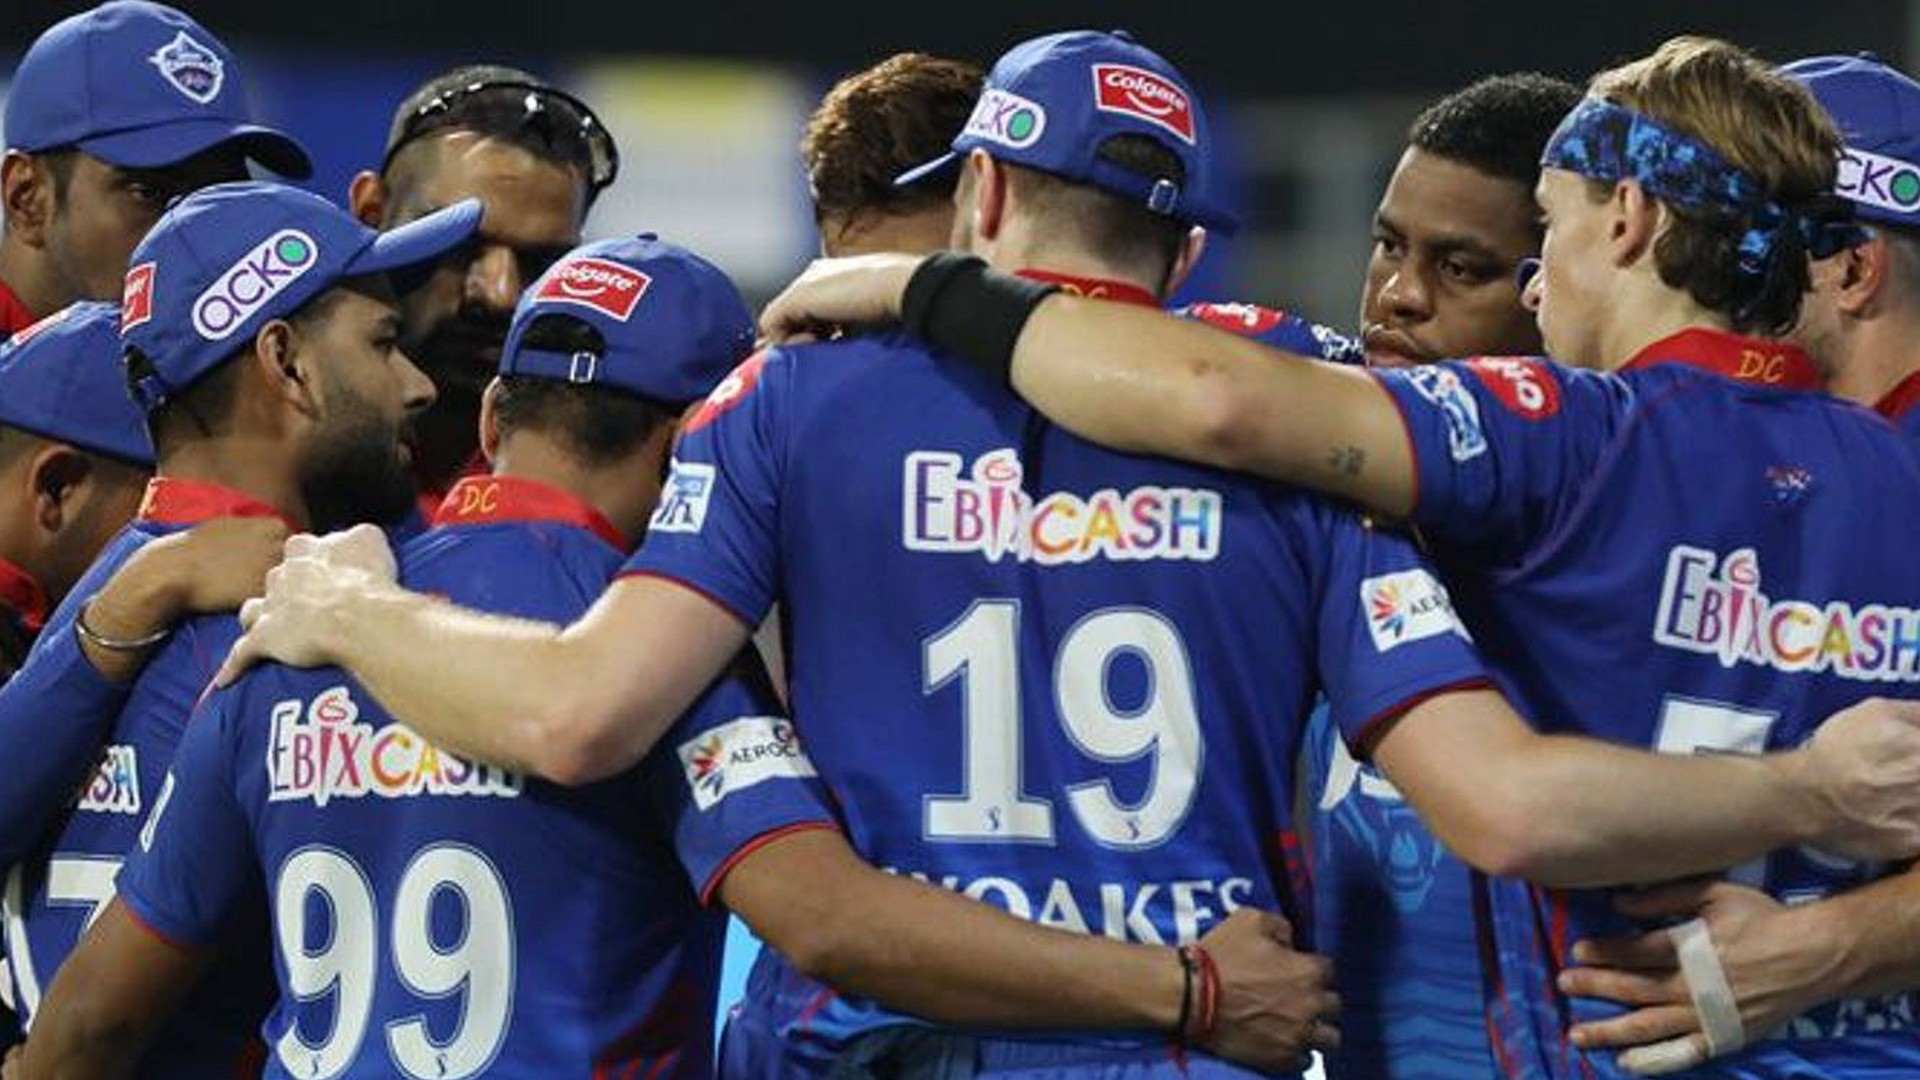 Delhi Capitals players in a file photo. (Image Credit: Twitter/@RickyPonting)